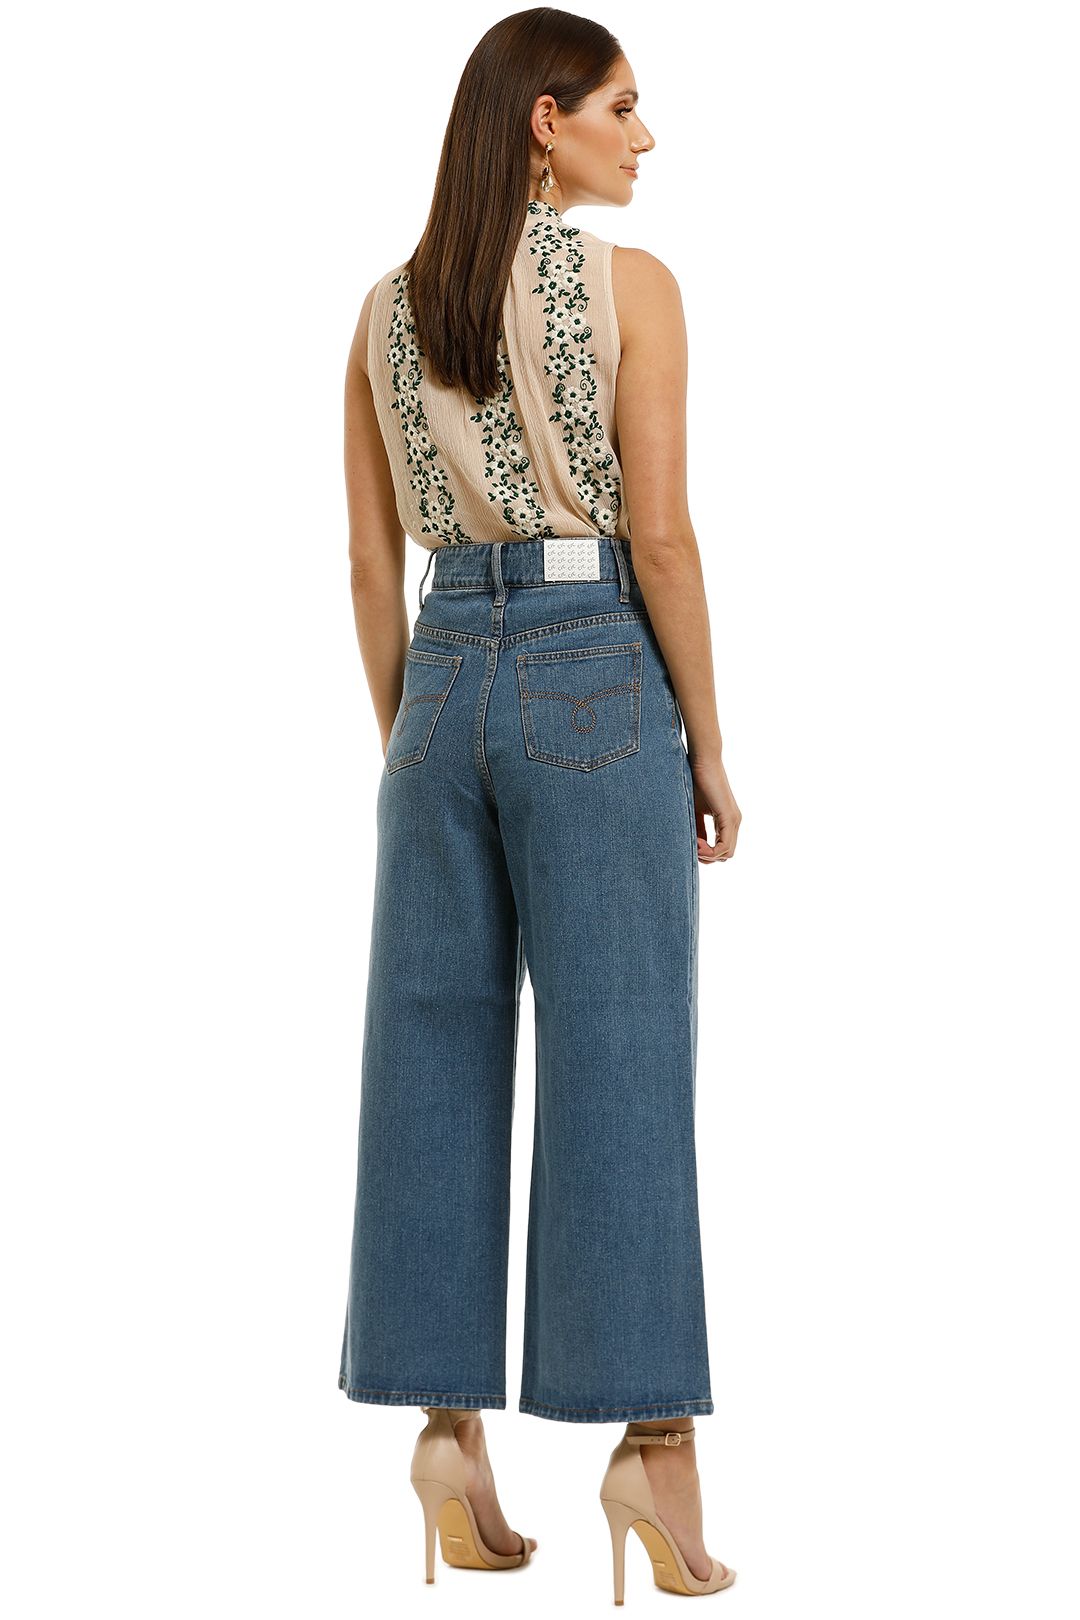 Collectif Floral I Know Flared Jeans in S